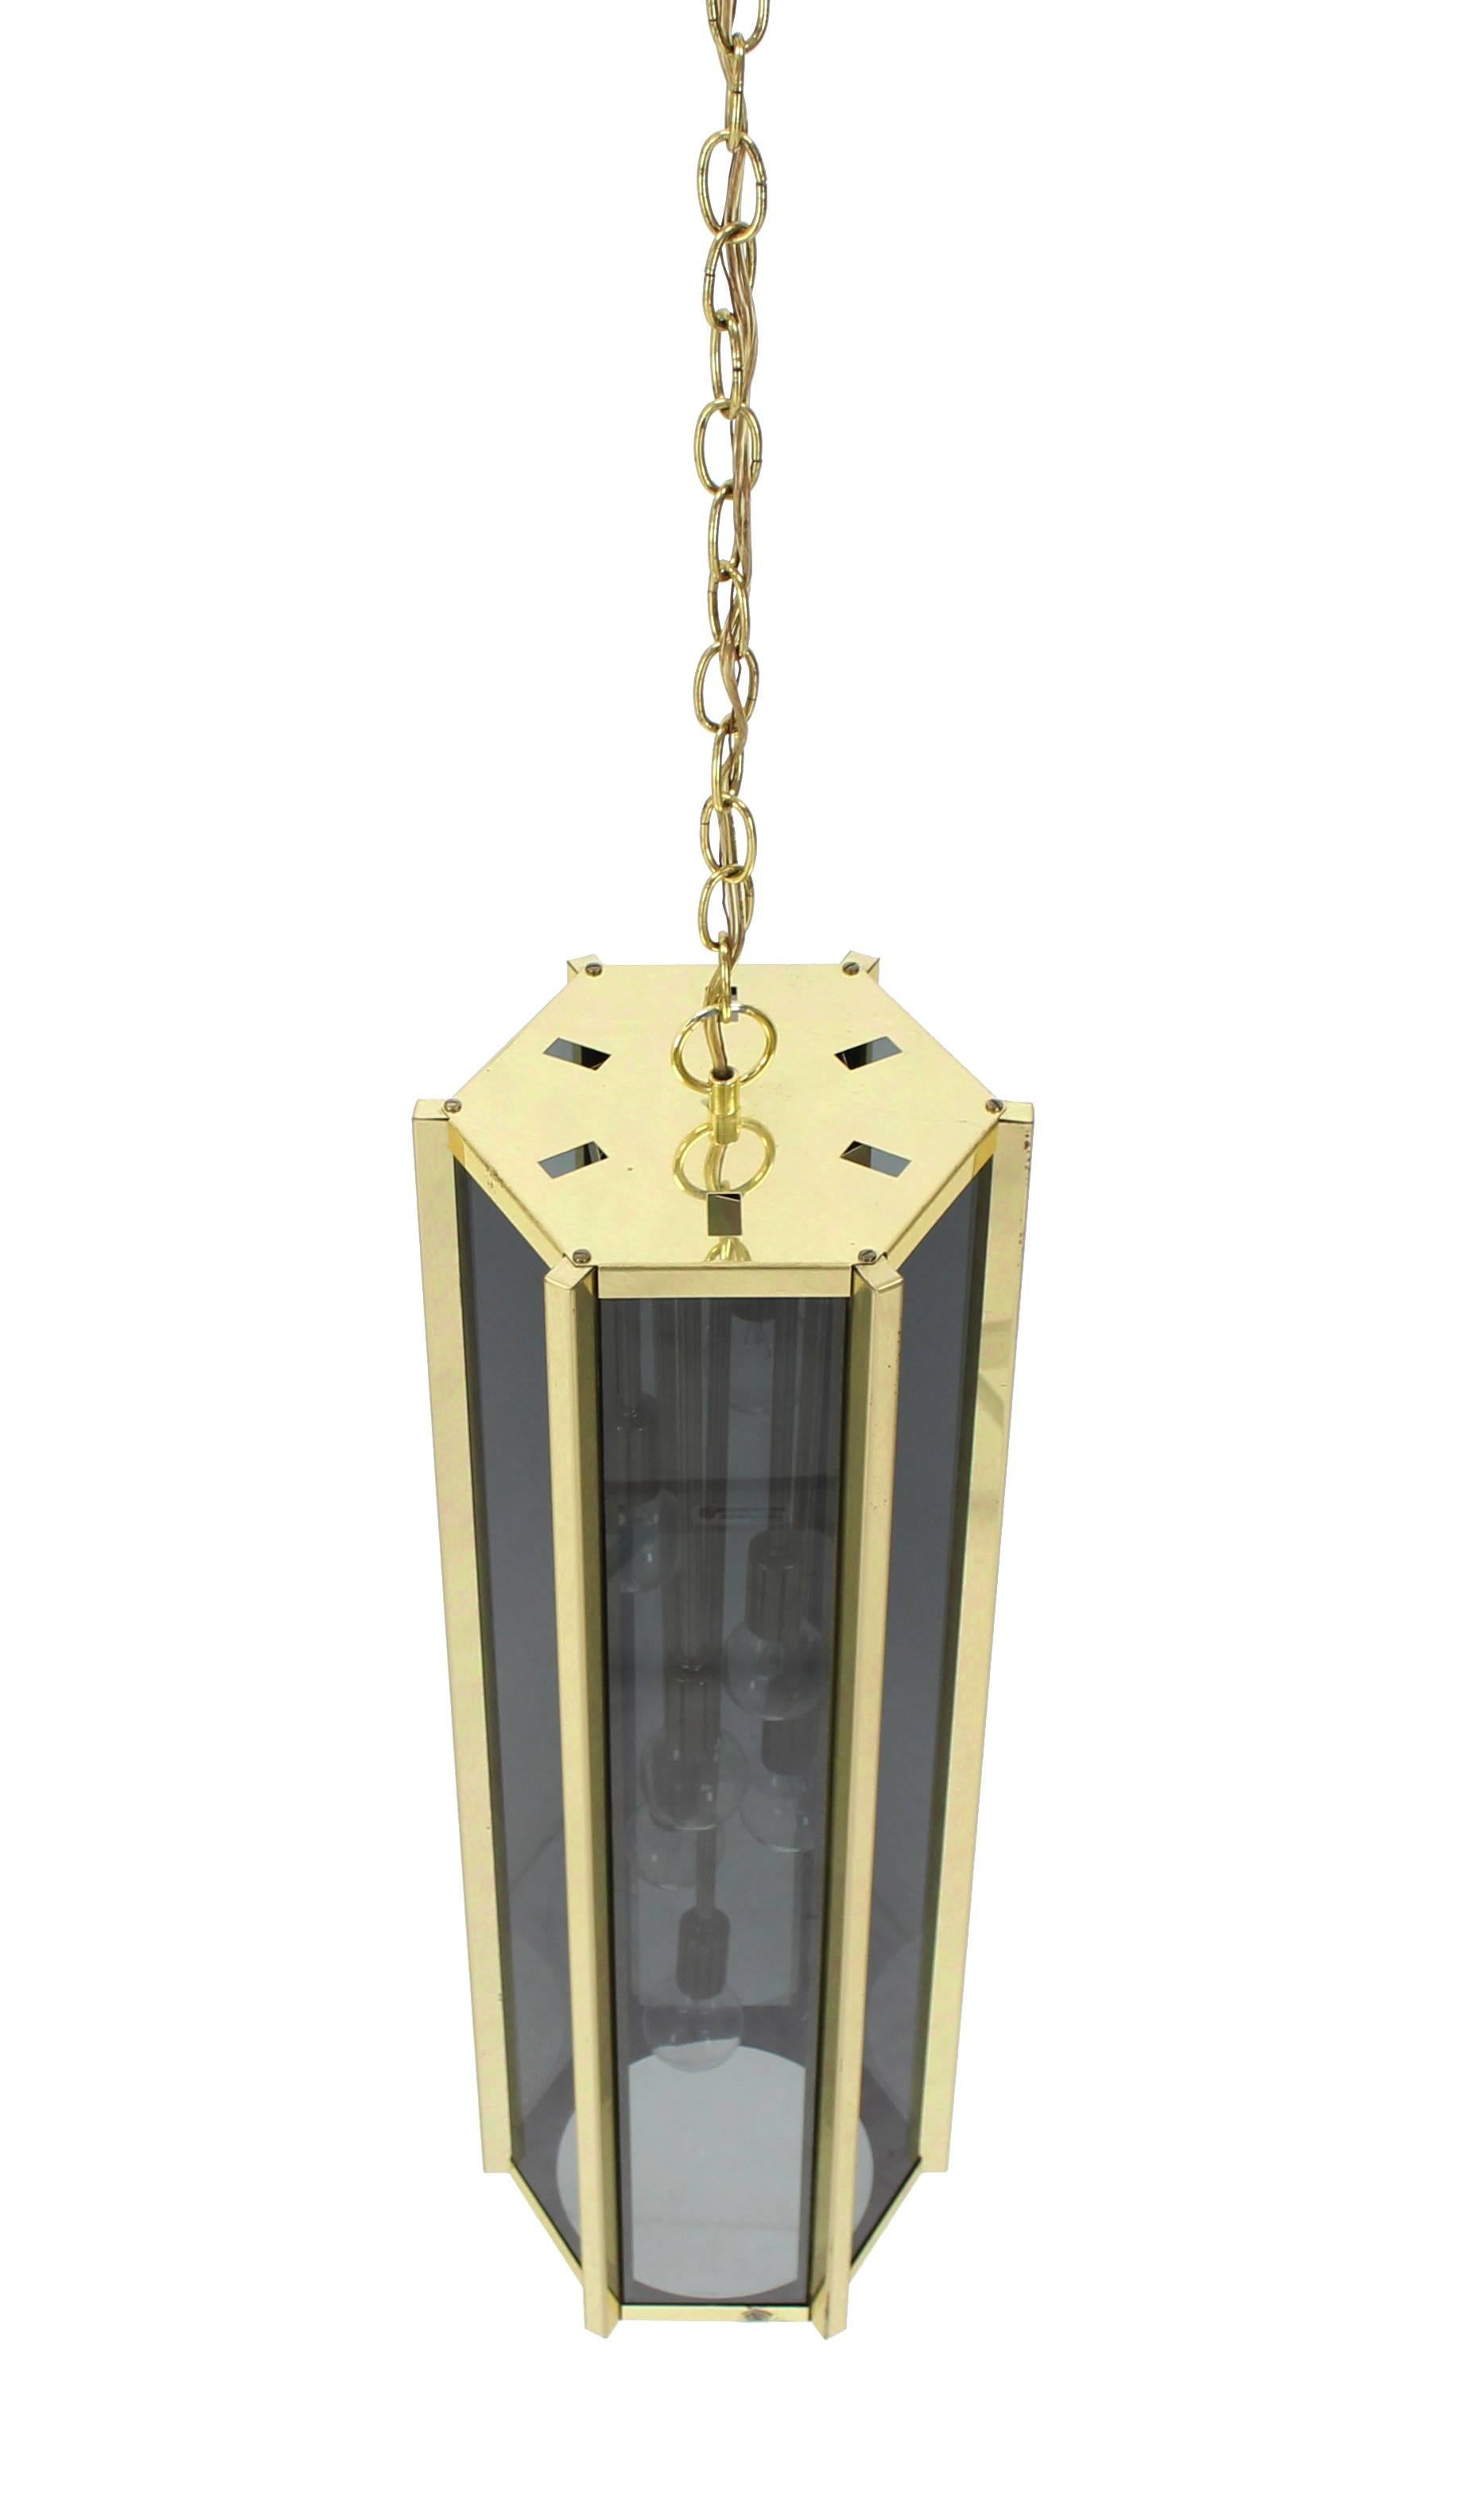 American Tall and Narrow Smoked Glass and Brass Pendant Light Fixture For Sale